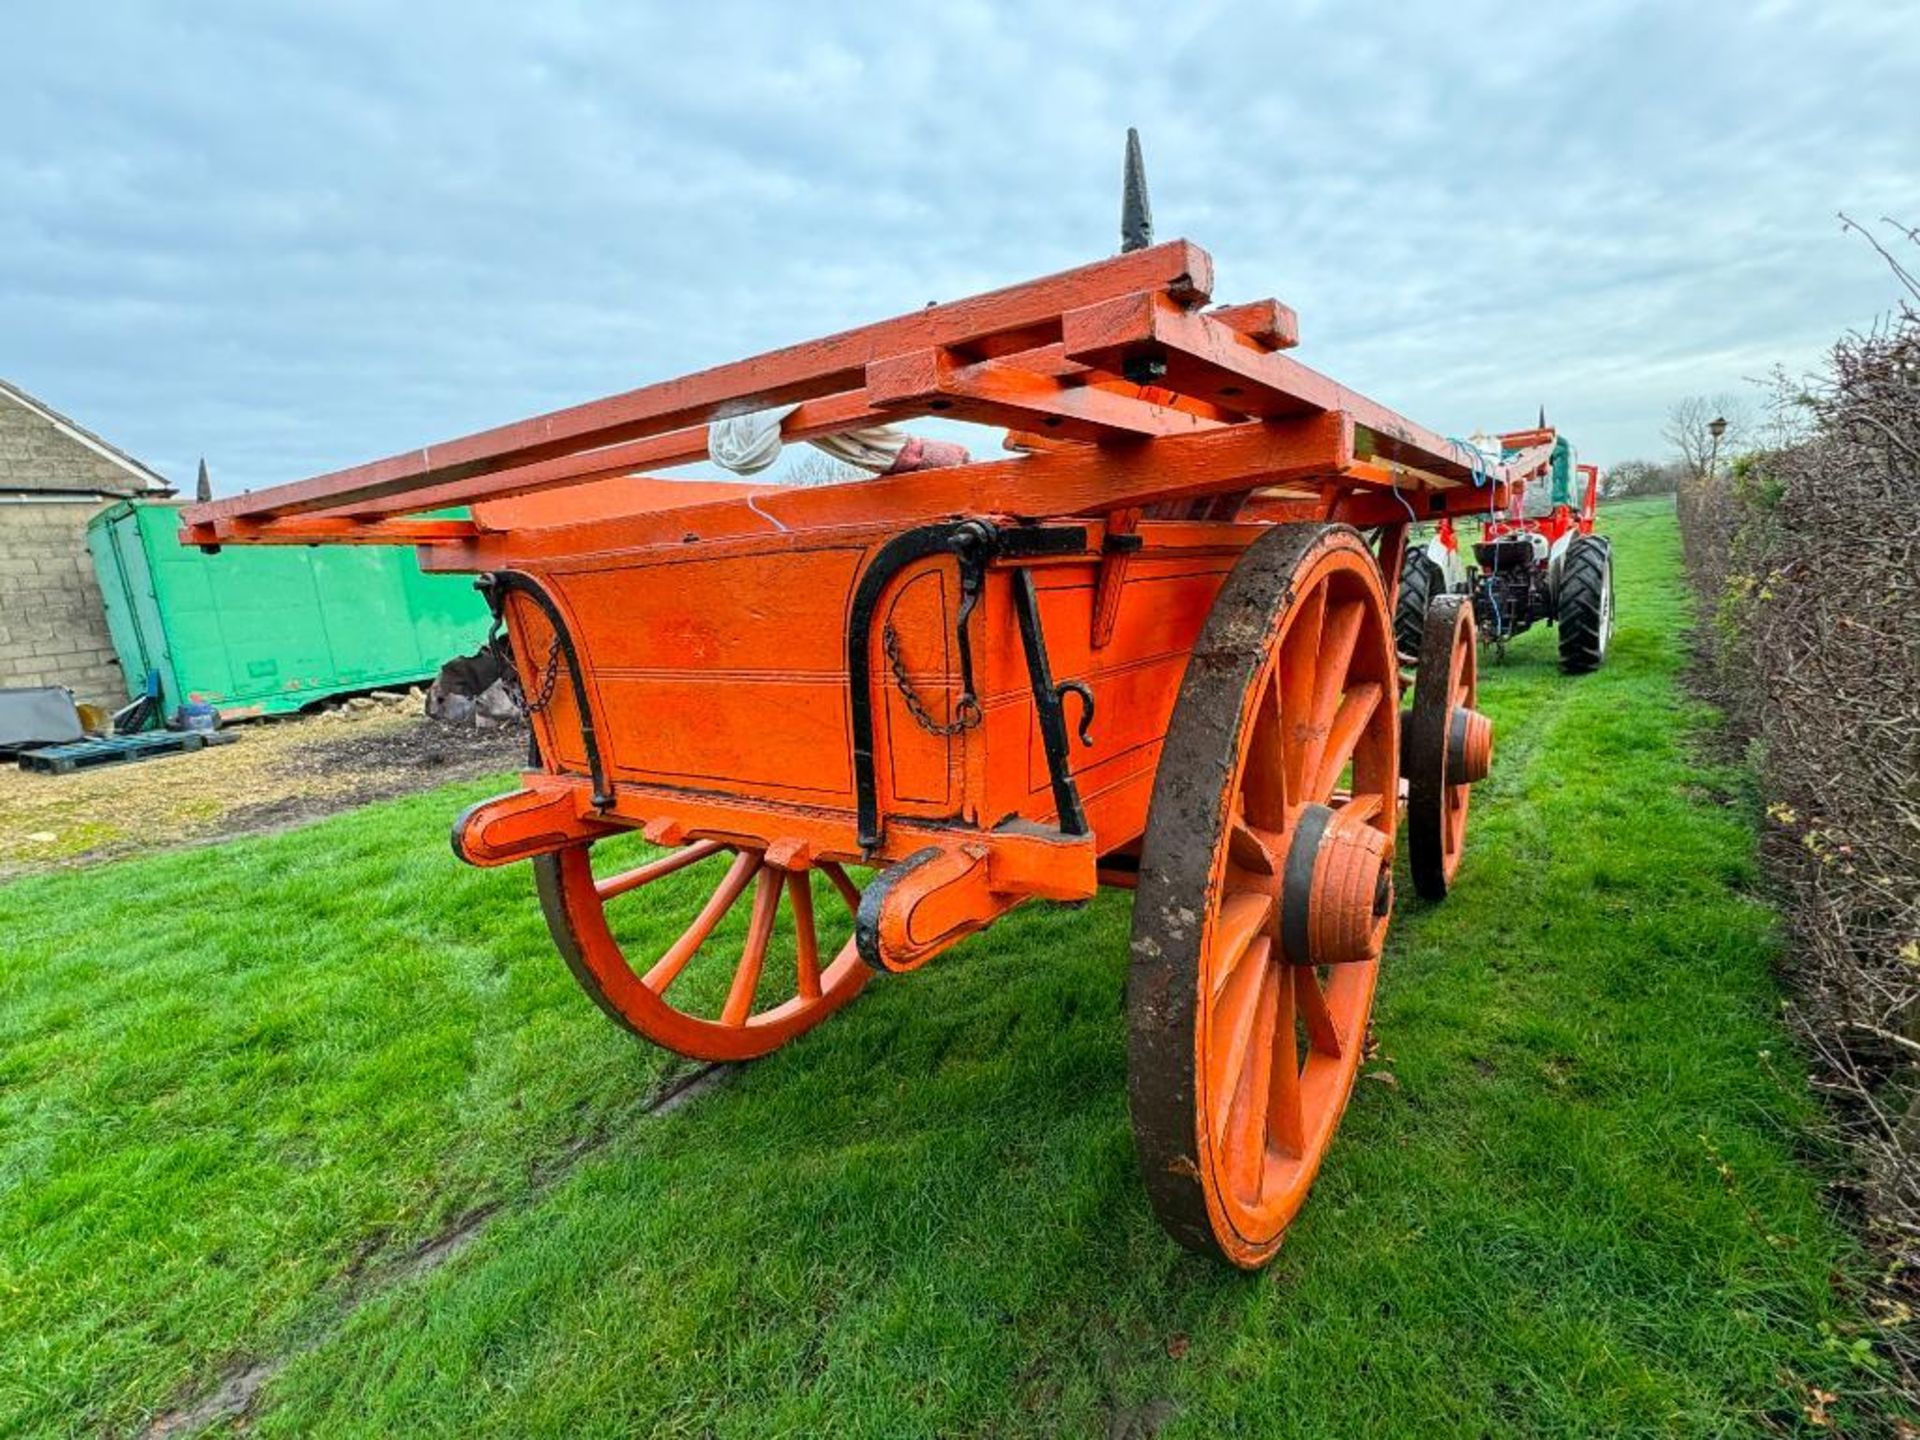 Cooke & Sons of Lincoln Ltd Hermaphrodite 4 wheel horse drawn wagon with additional tractor drawbar - Image 10 of 10